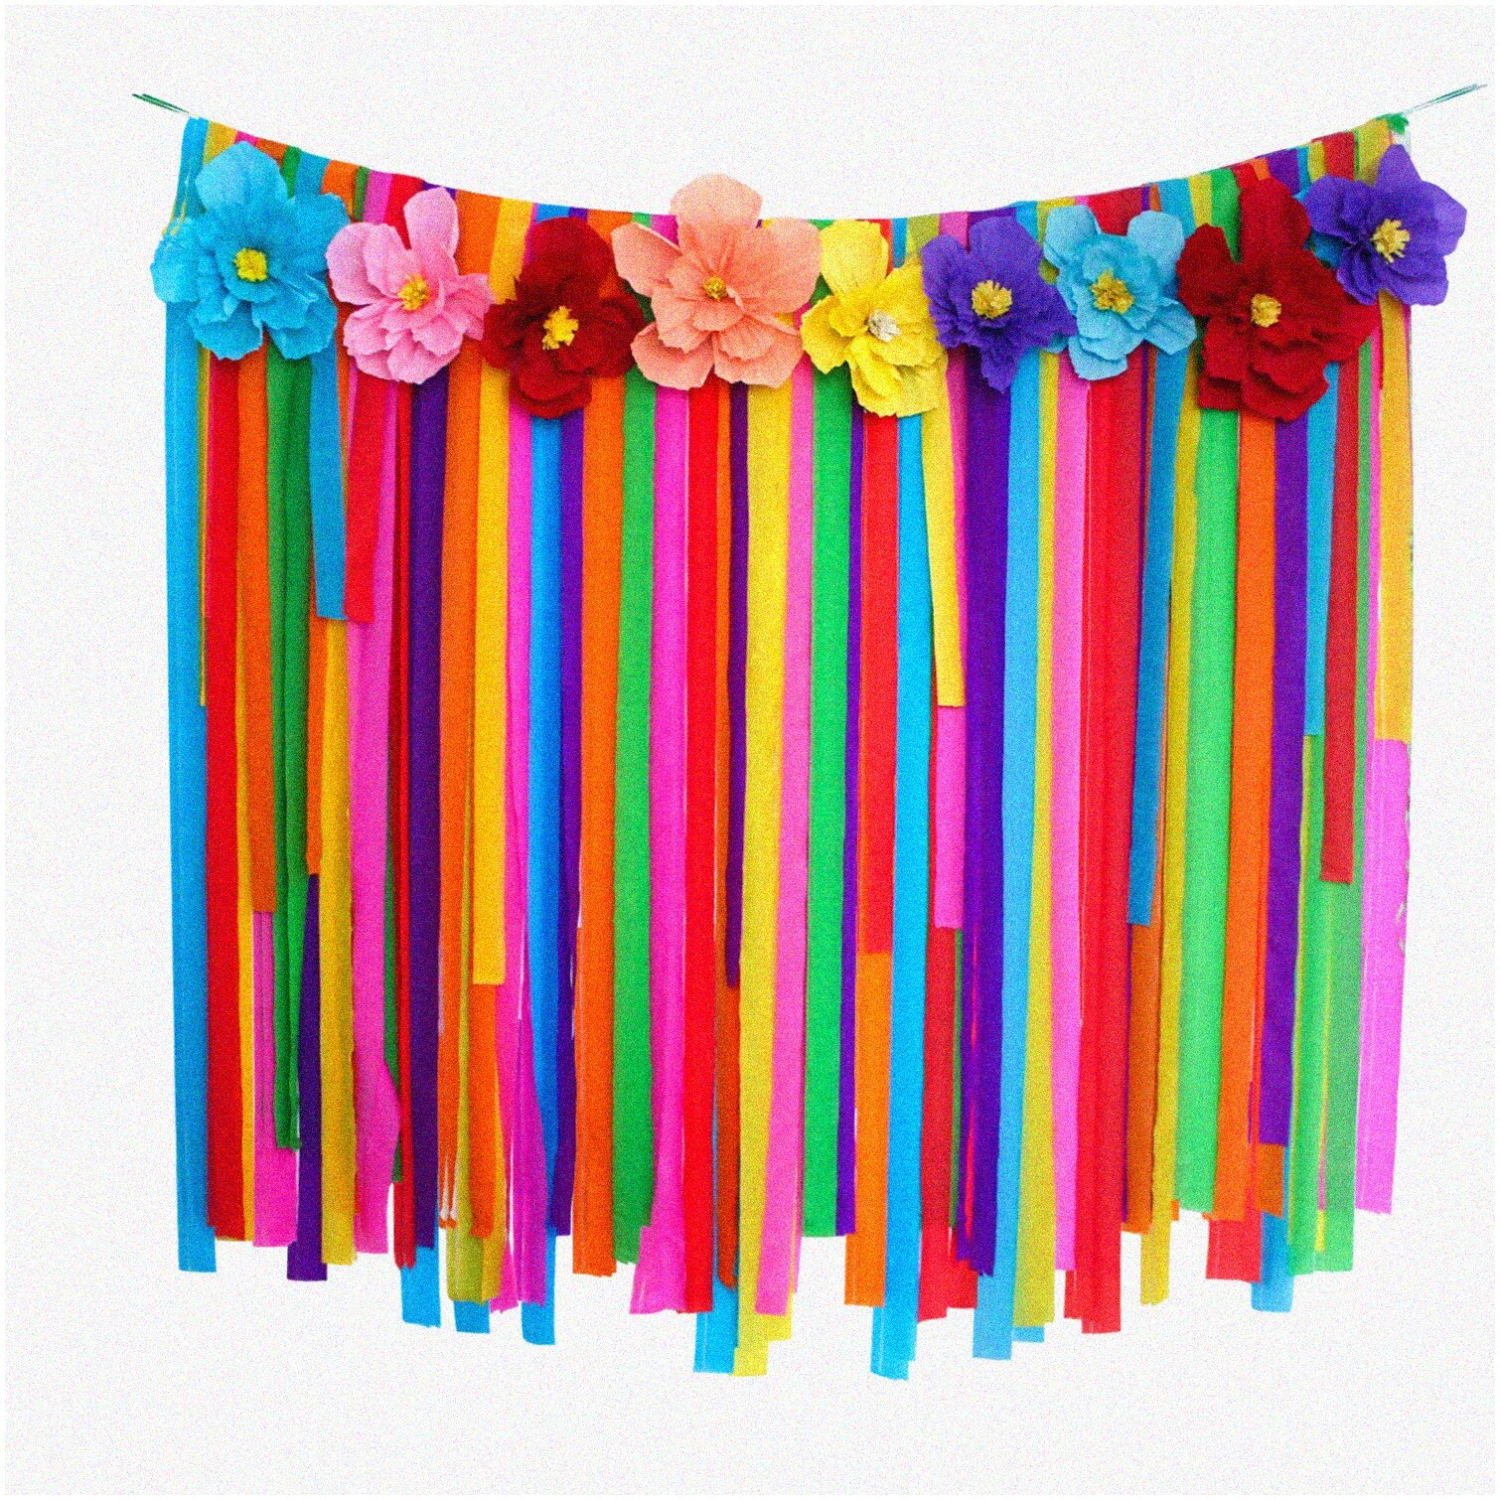 Fiesta Fiesta: 16Pcs Mexican Paper Flowers & Streamer Backdrop - Vibrant Cinco De Mayo Party Decorations for Taco Party, Mexican Baby Shower, Wedding Bir!